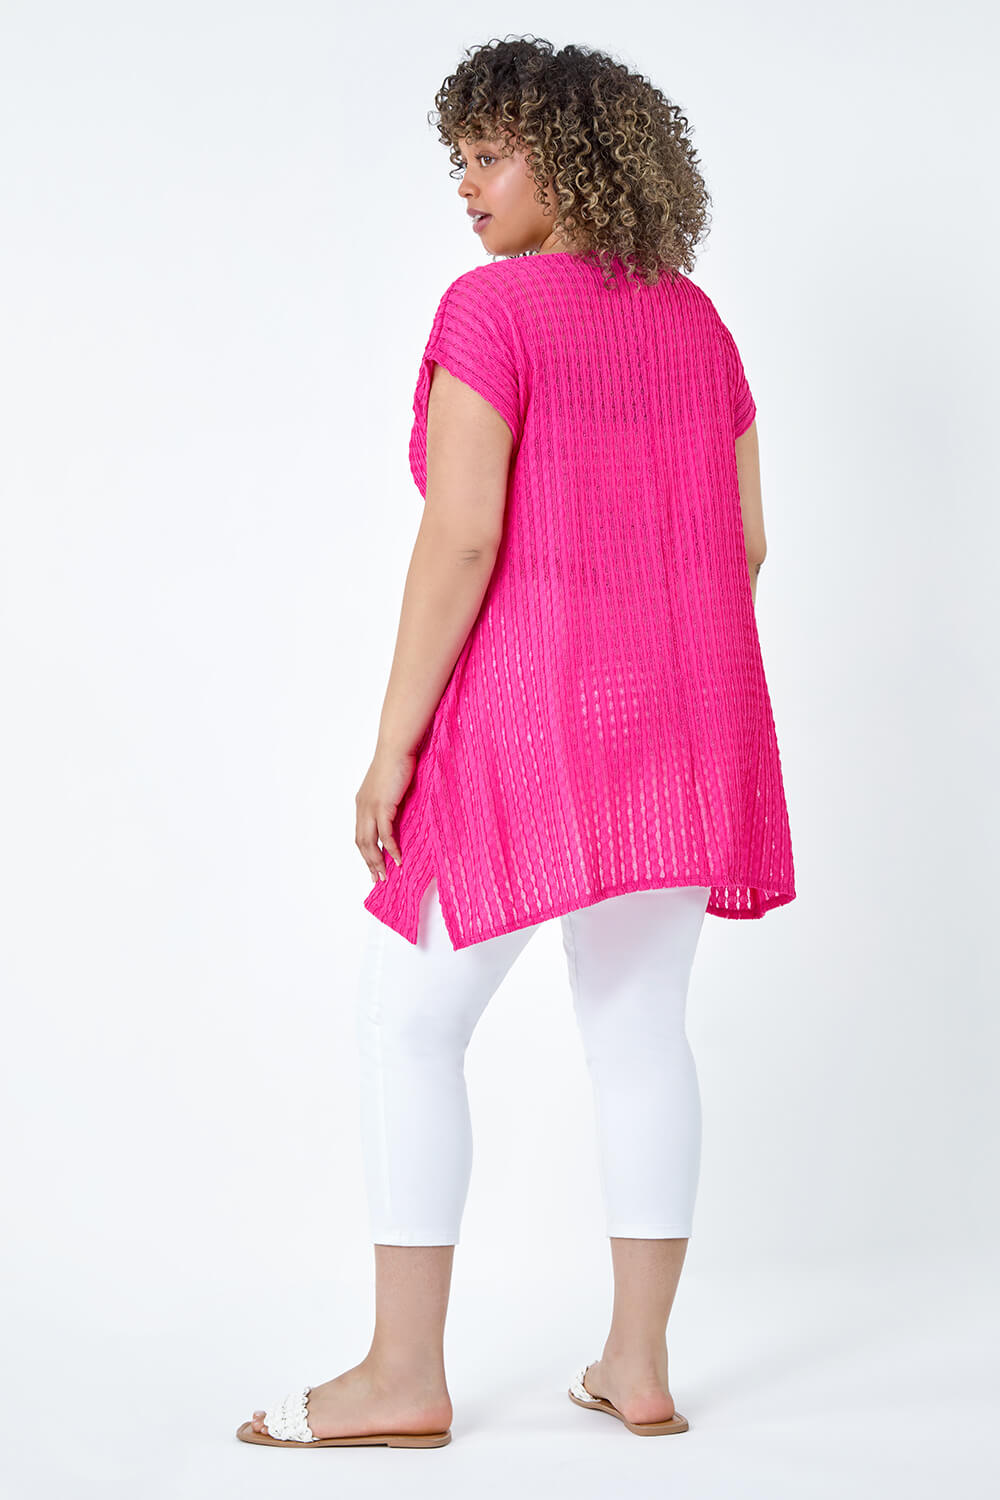 PINK Curve Textured Short Sleeve T-Shirt, Image 3 of 5